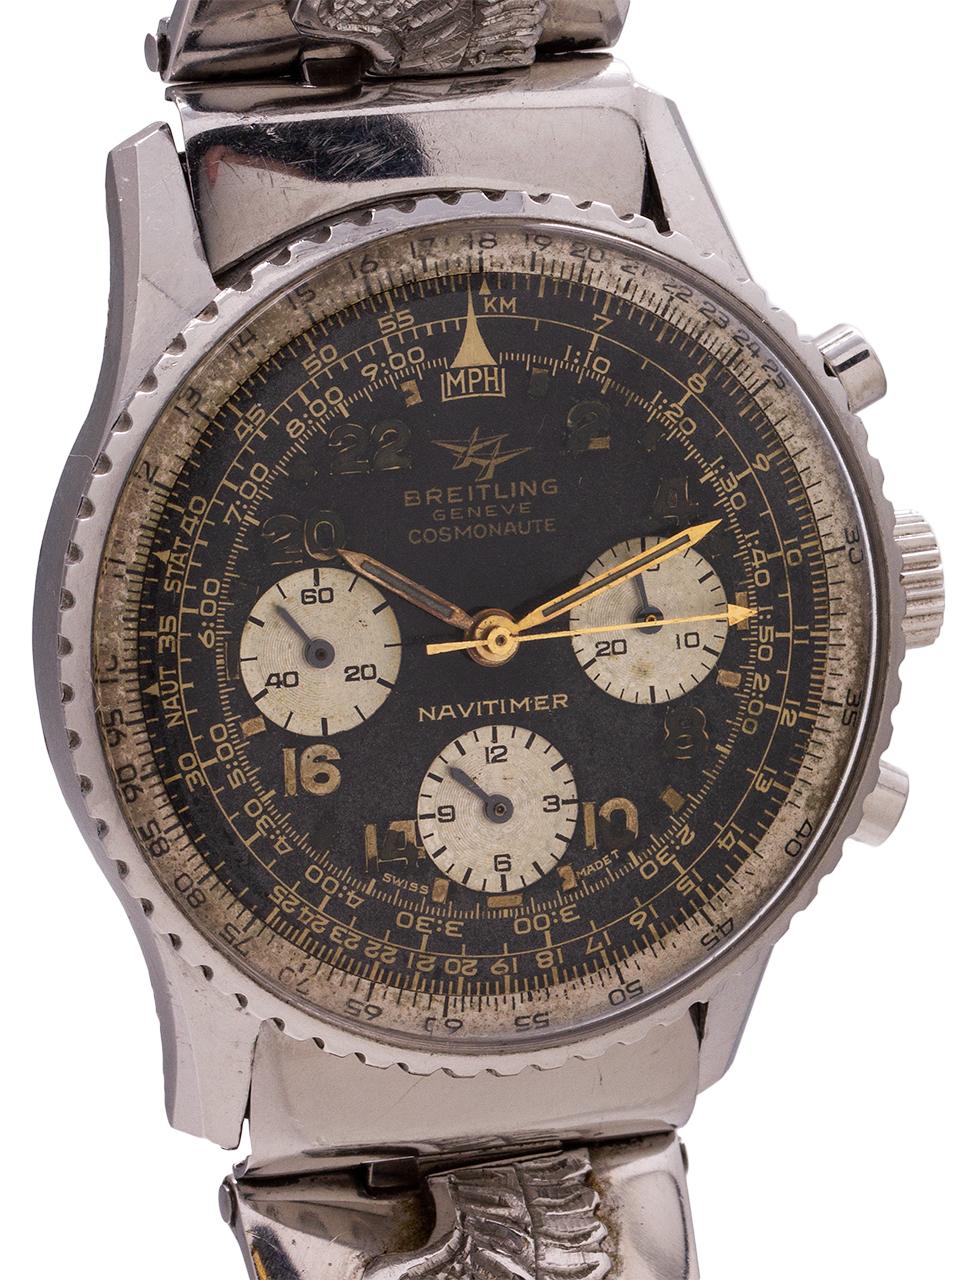 An very cool original vintage Breitling 24 hour Navitimer Cosmonaute aviator’s chronograph circa 1965/66 with custom Olongapo bracelet with U.S.Air Force wings appliques. With caseback serial # of 1.09 million, we date the production of this model